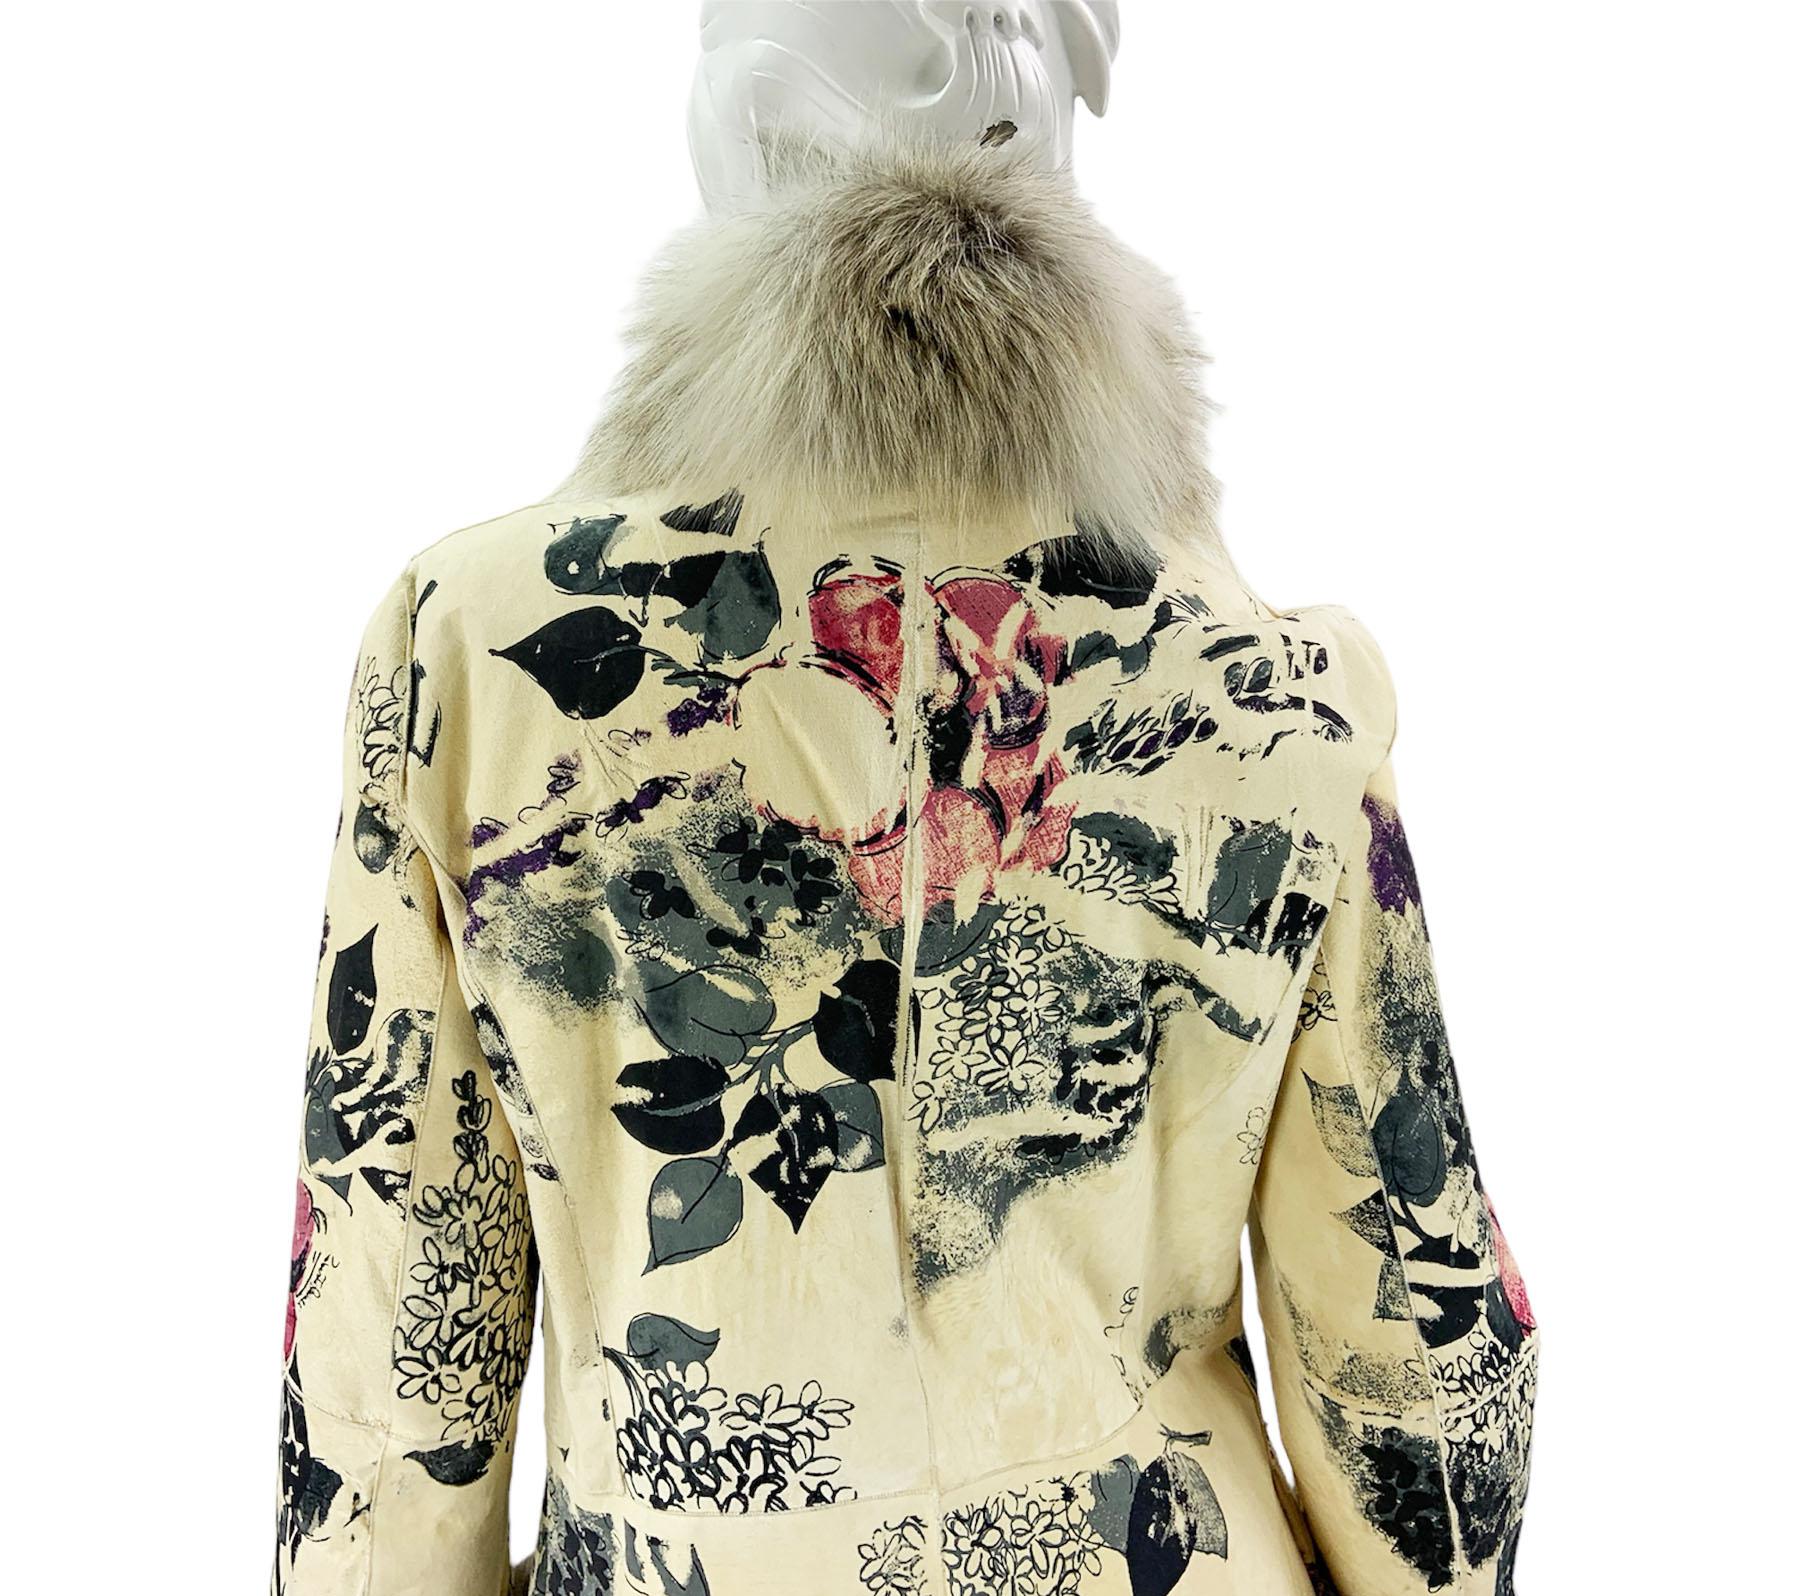 Roberto Cavalli F/W 2008 Shearling Hand Painted Fur Lined Coat Italian 40 NEW For Sale 7